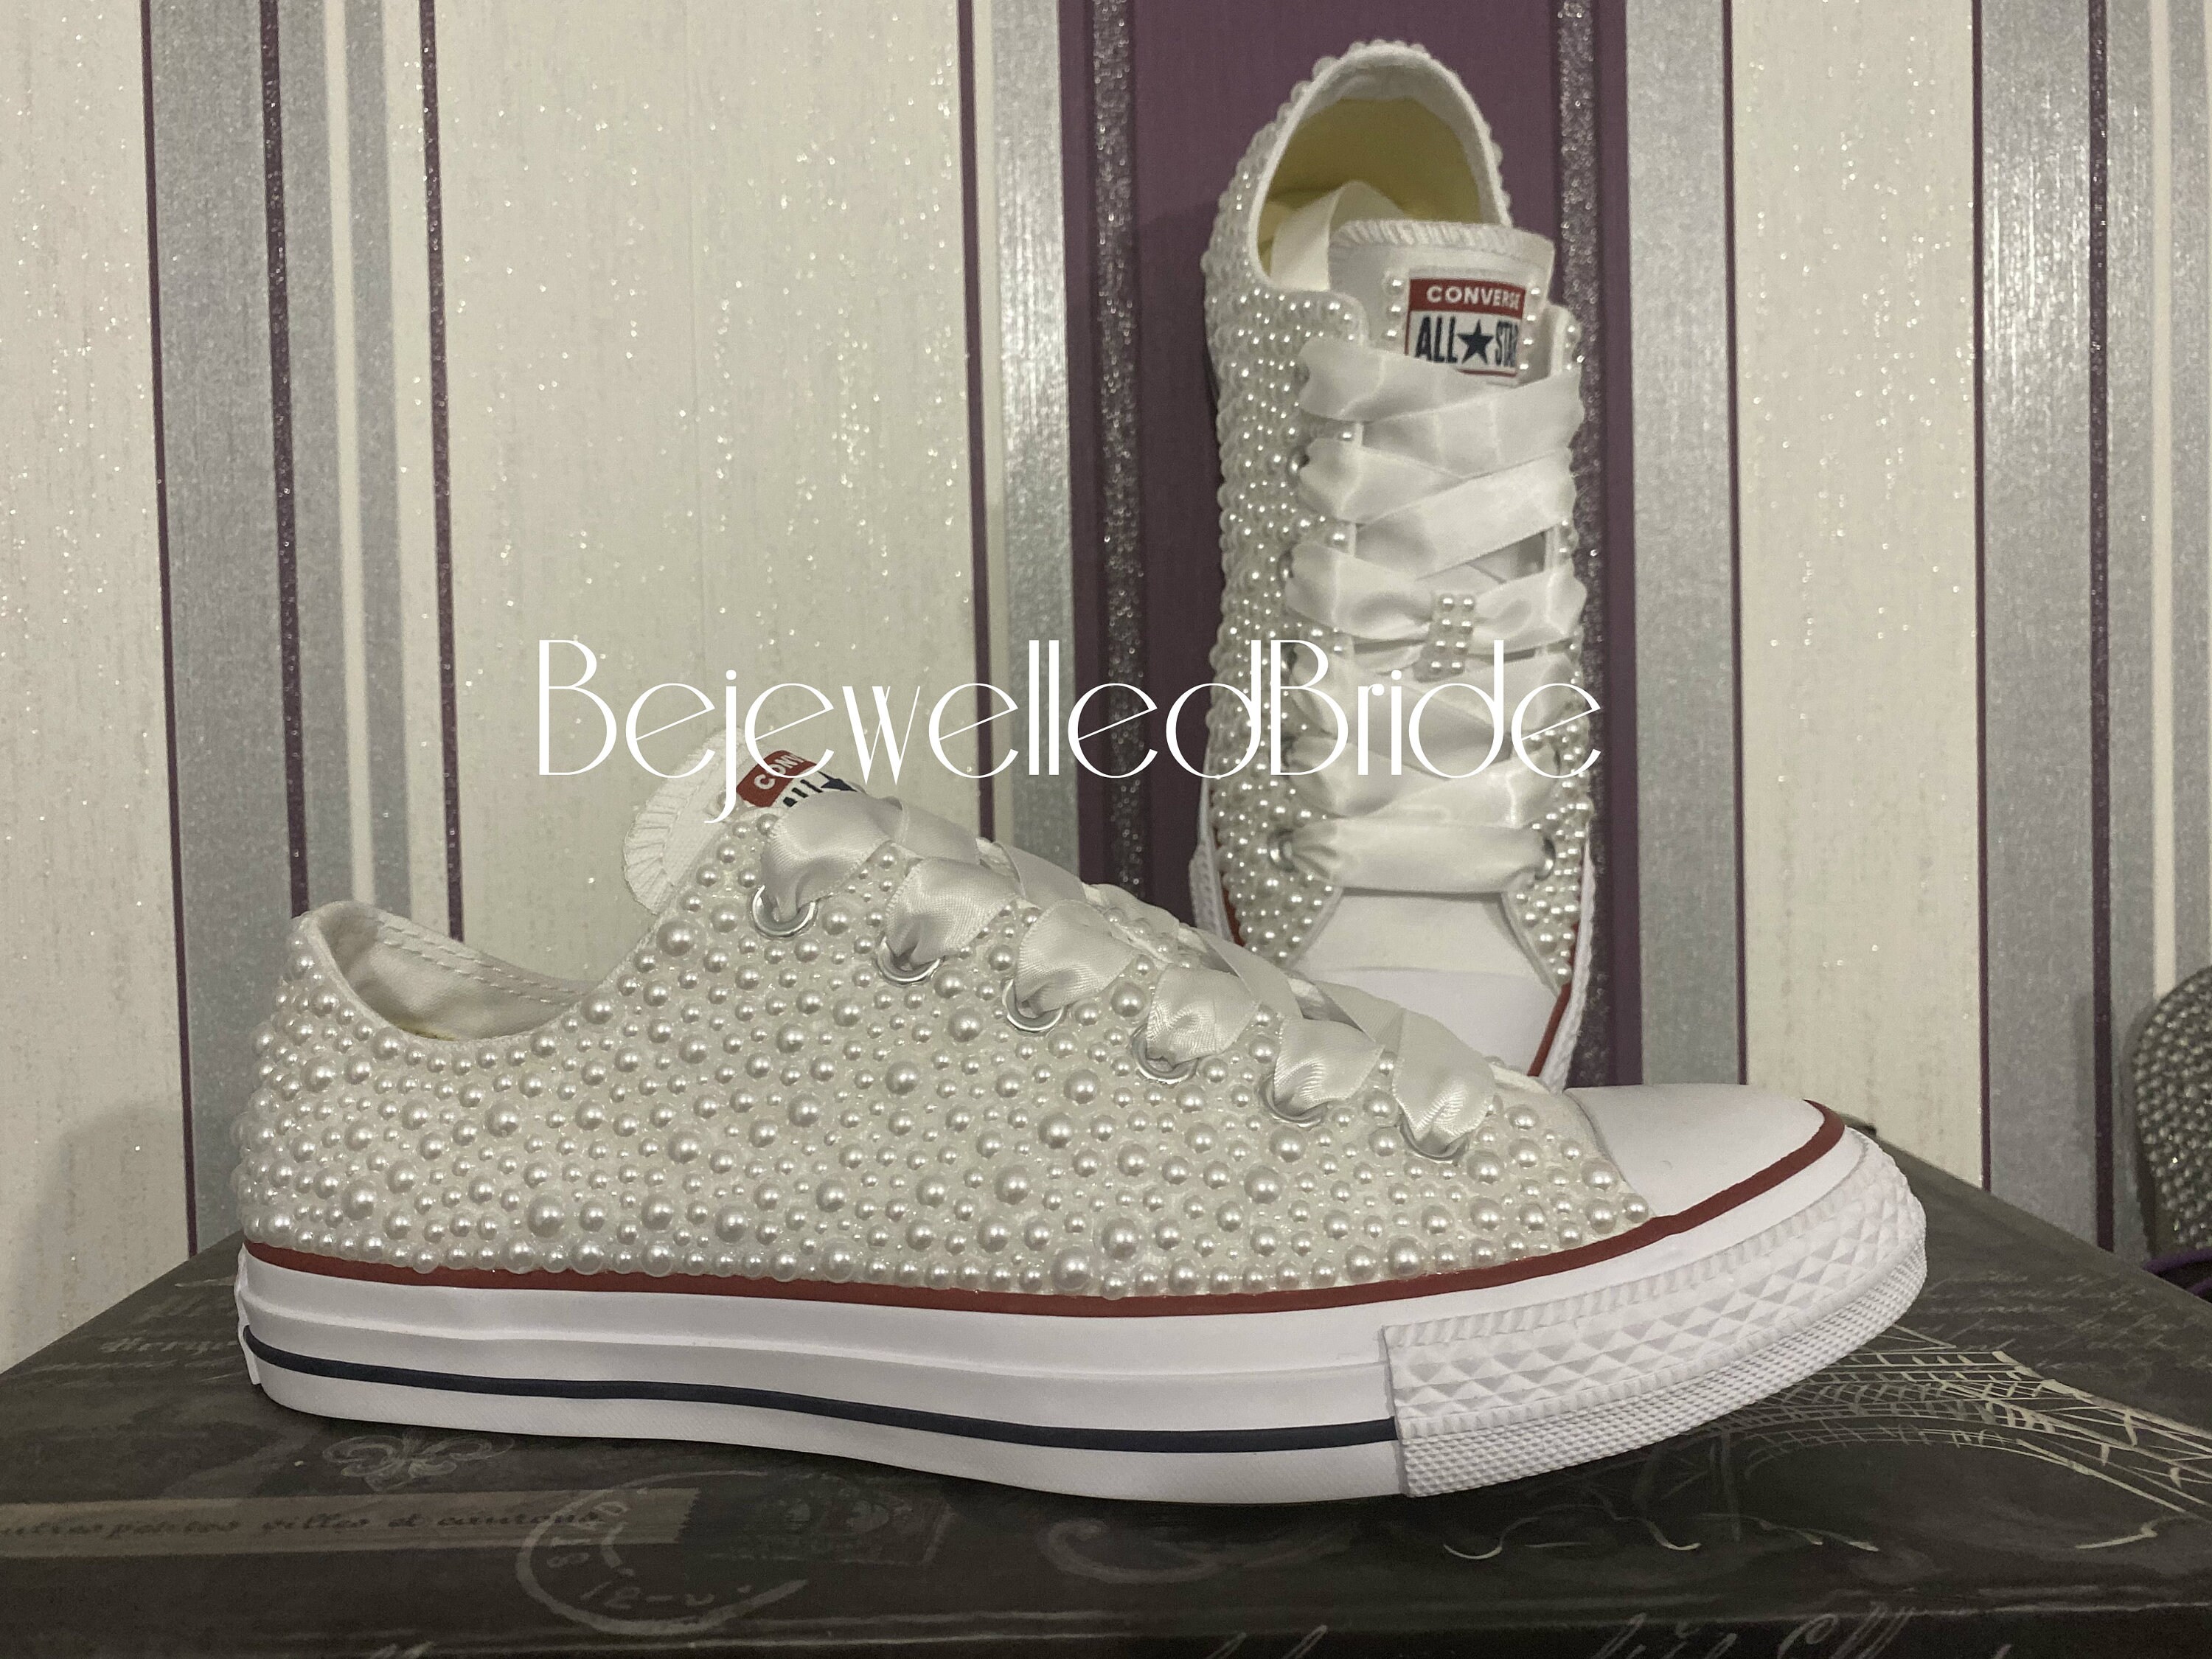 Gorgeous Wedding Converse All Star Chucks With White Pearls - Etsy UK